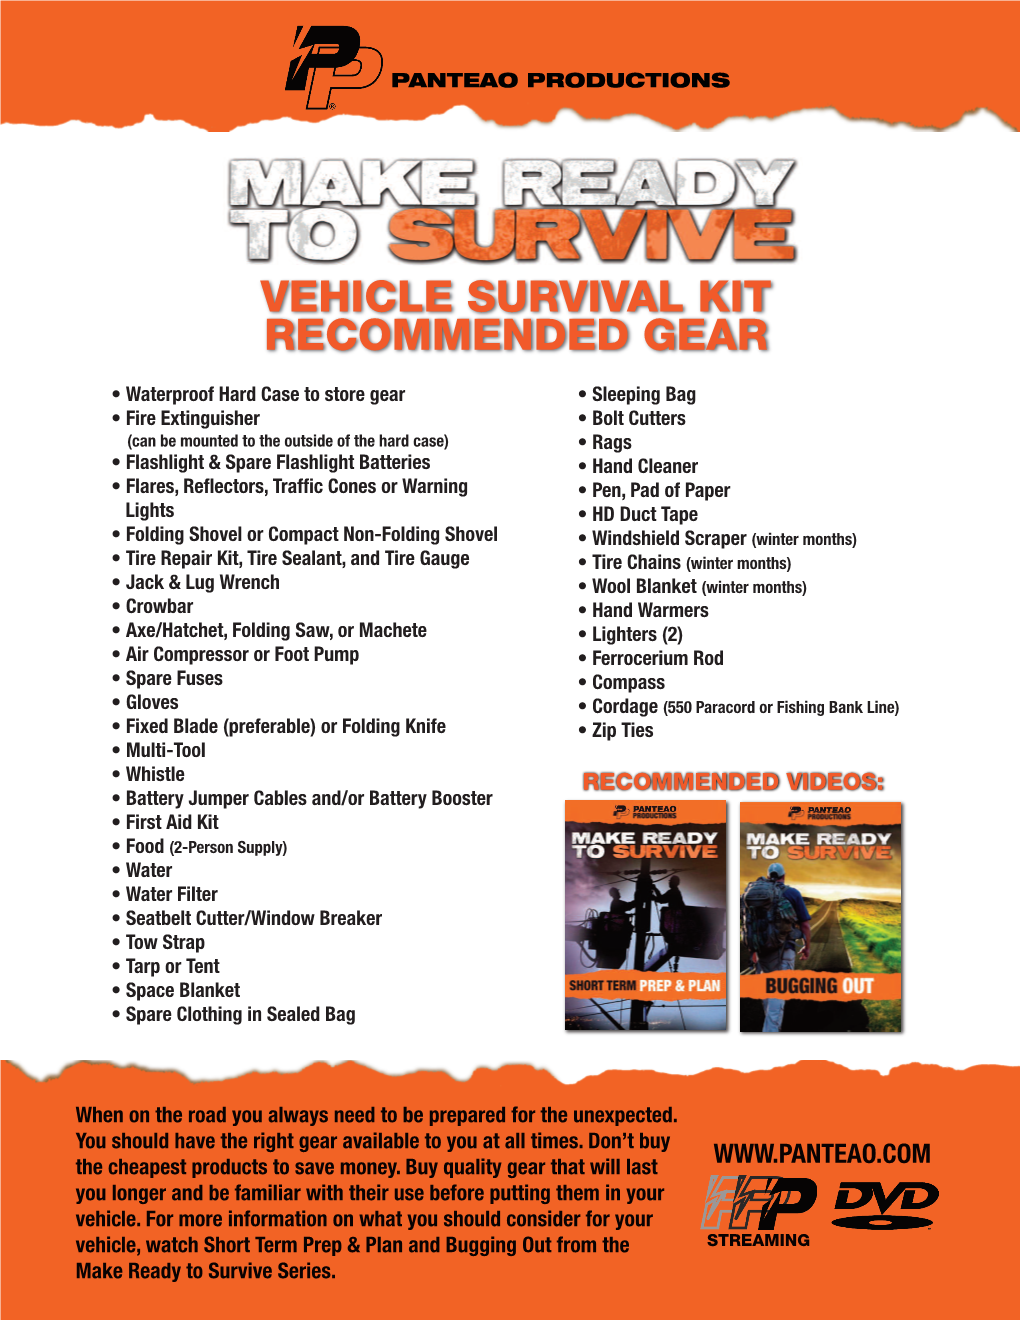 Vehicle Survival Kit Recommended Gear